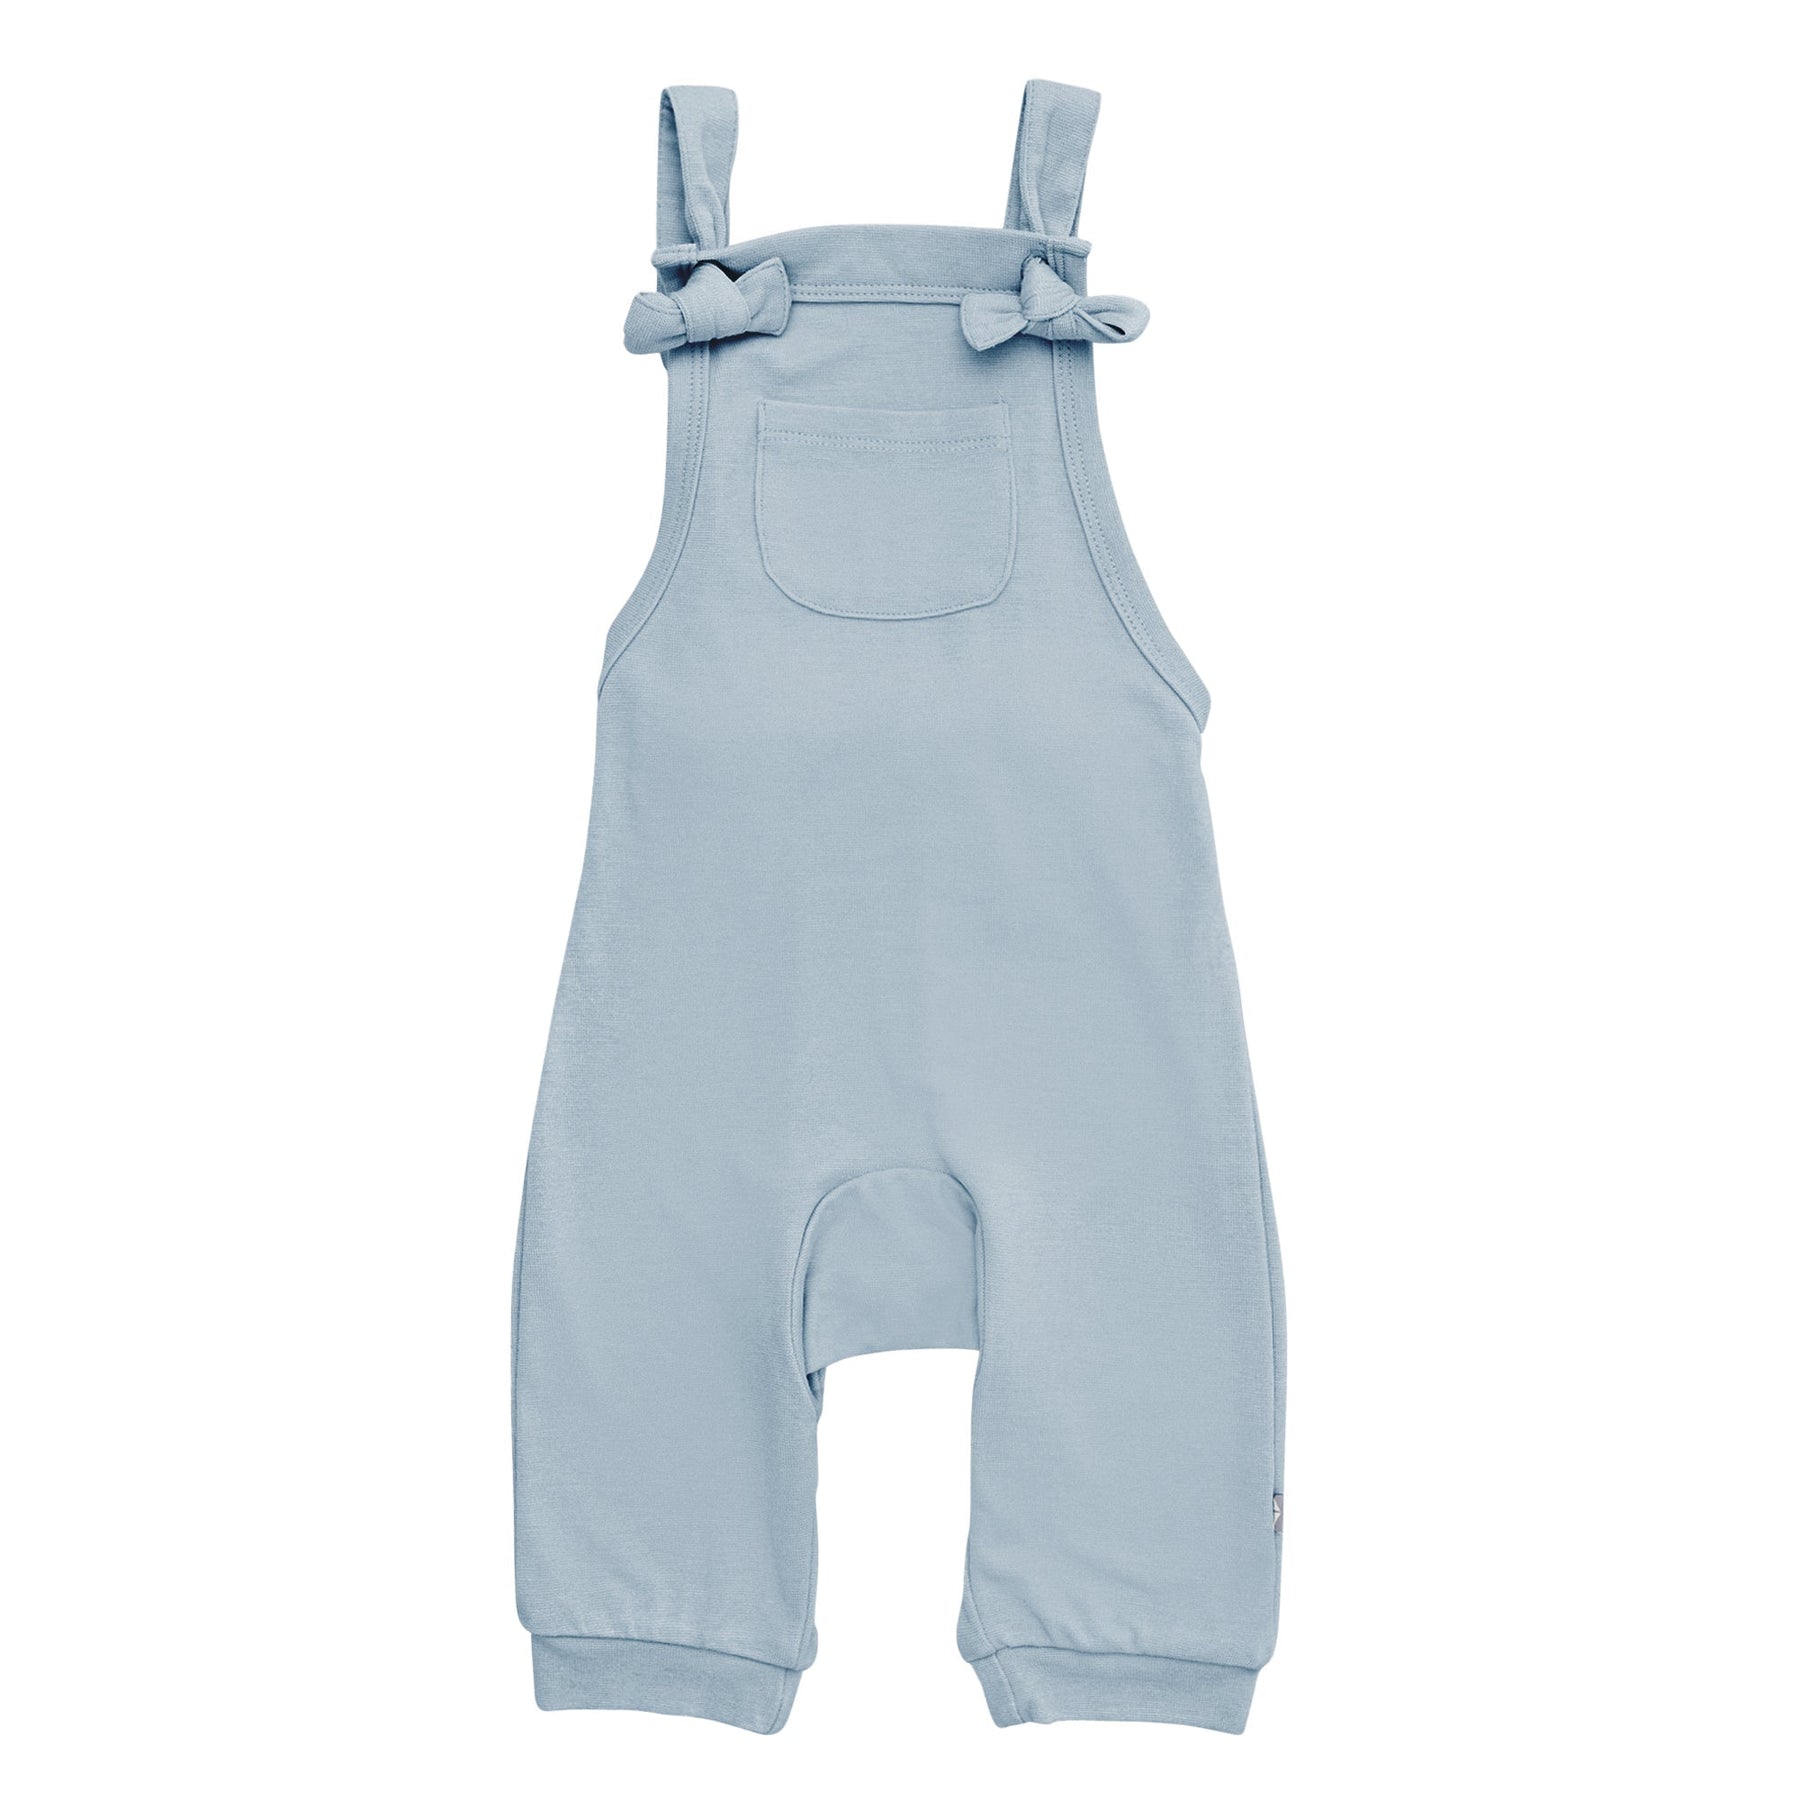 Kyte BABY Baby Overall Bamboo Jersey Overall in Fog